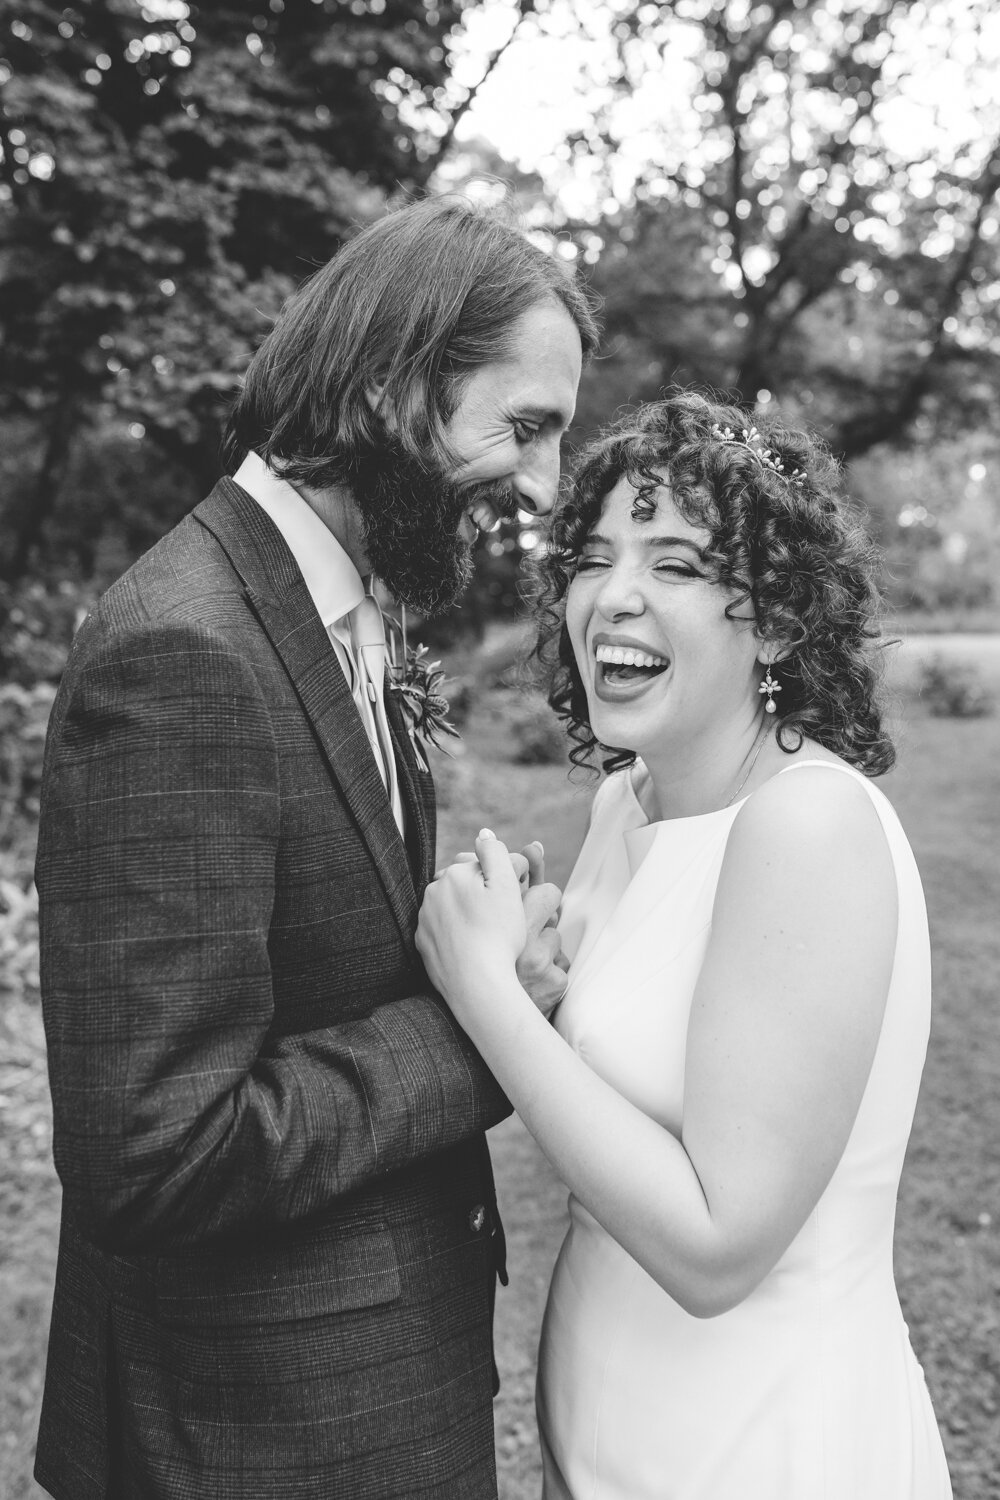 Winter is the perfect time for me to shout about some awesome weddings I've done that I haven't always got round to sharing. Vicky &amp; Andy had a beautiful summer wedding with lots of Egyptian touches (and a bouncy castle!) ⁣
I just bloody love thi